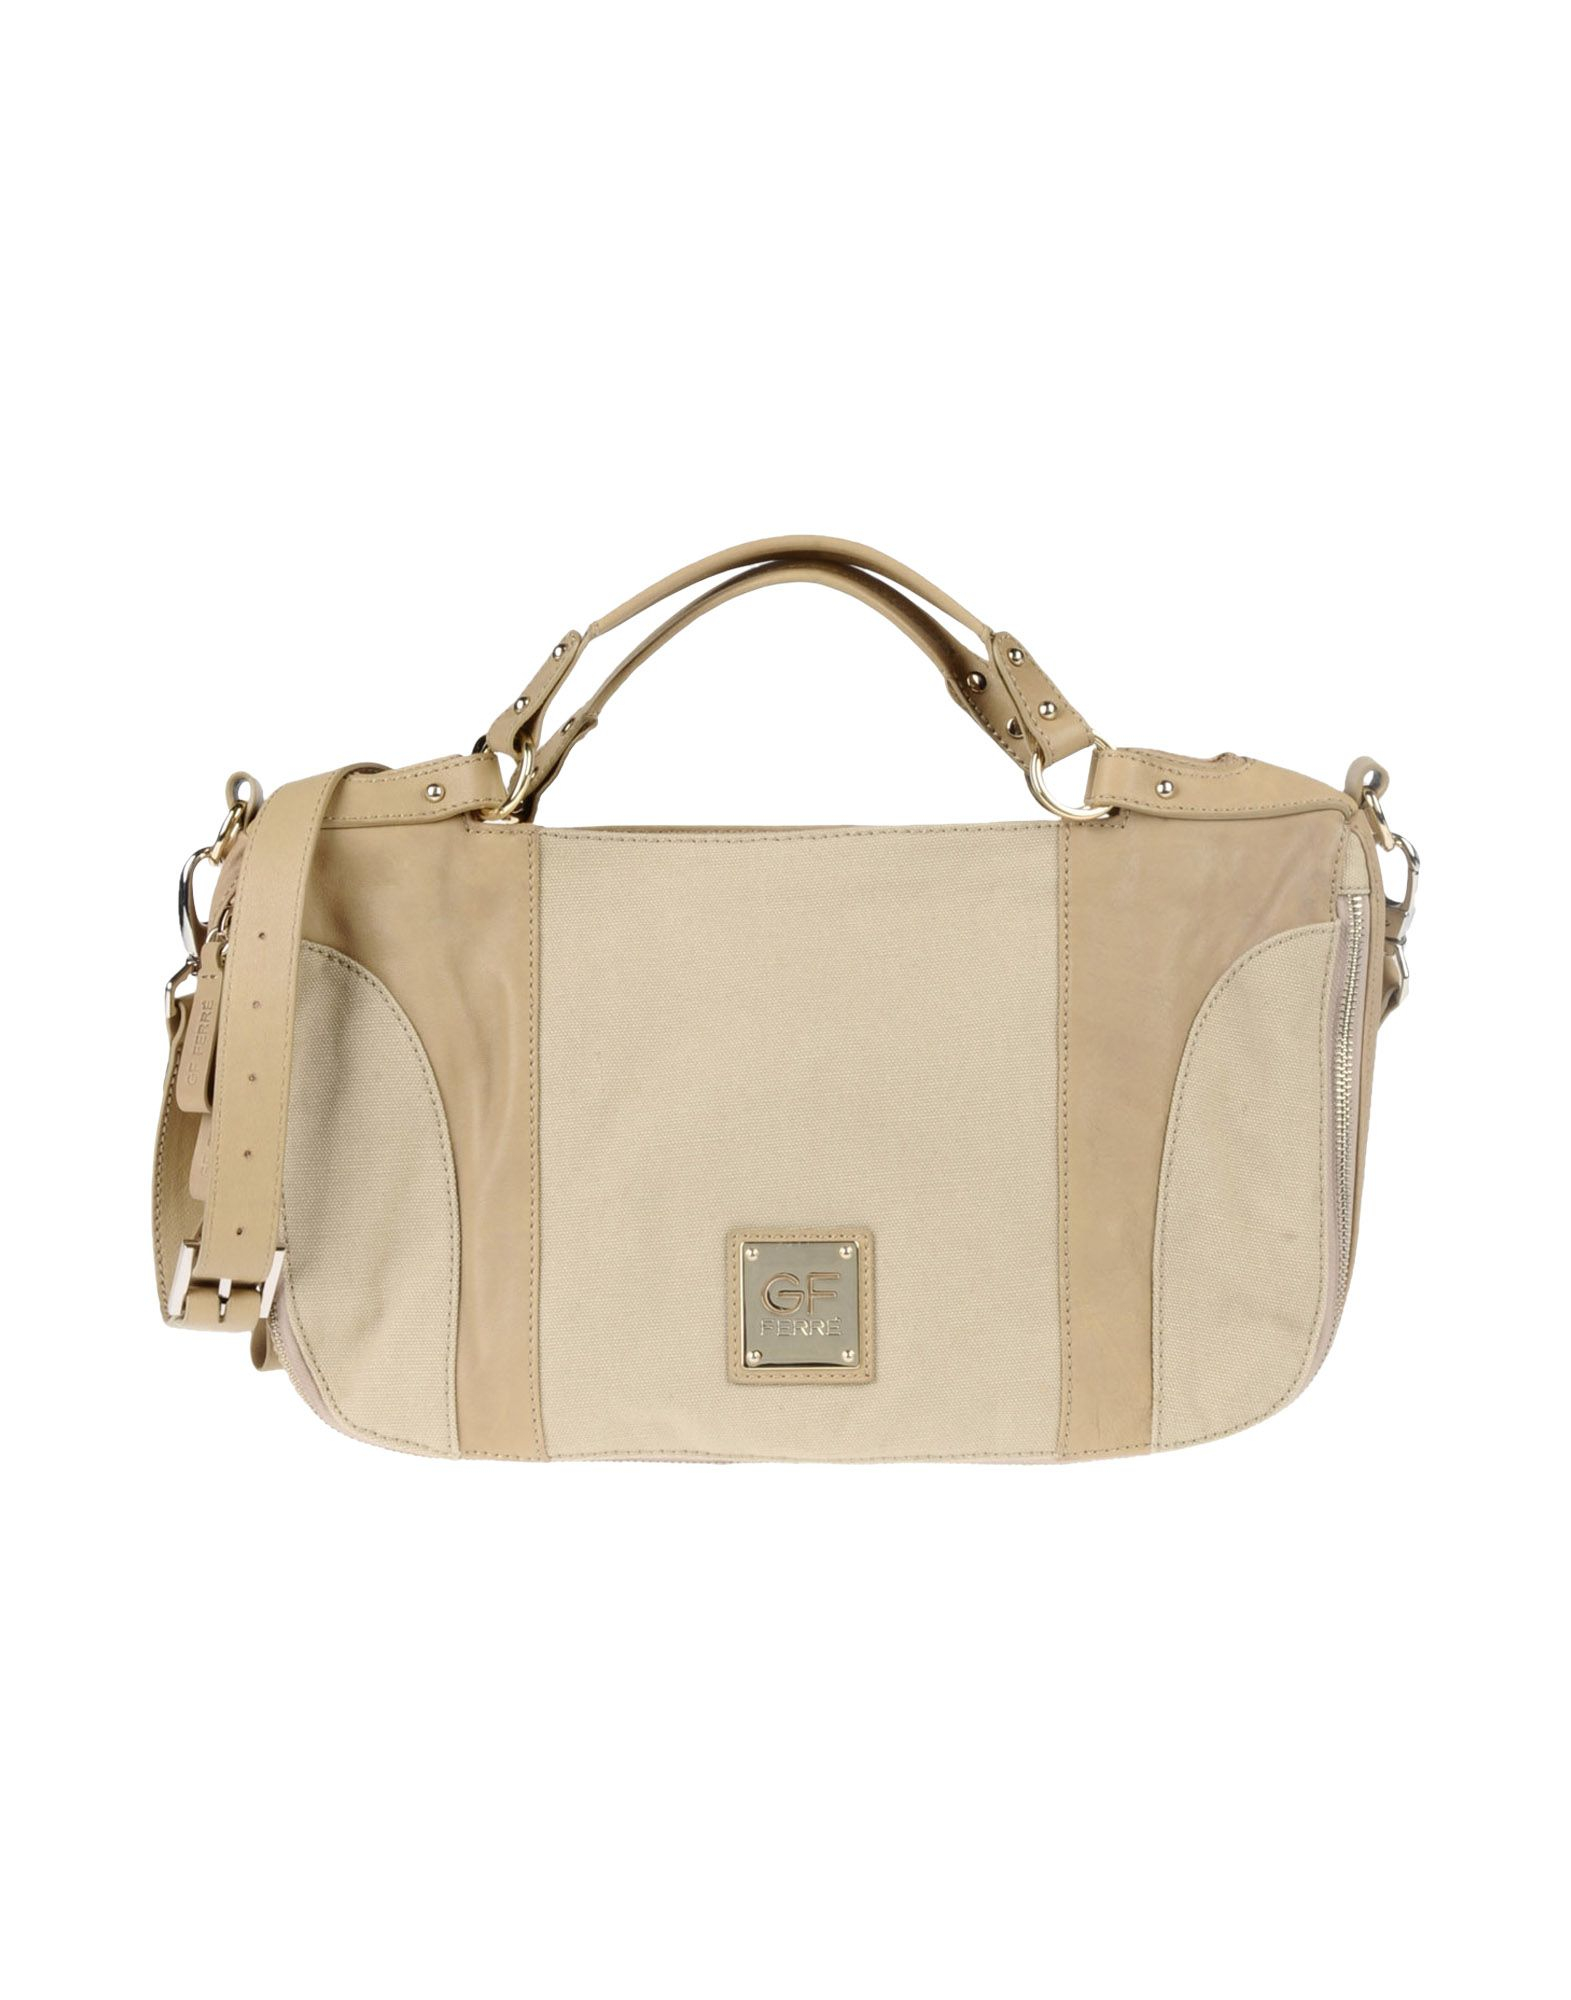 Gianfranco Ferré Large Leather Bag in Beige (Sand) | Lyst